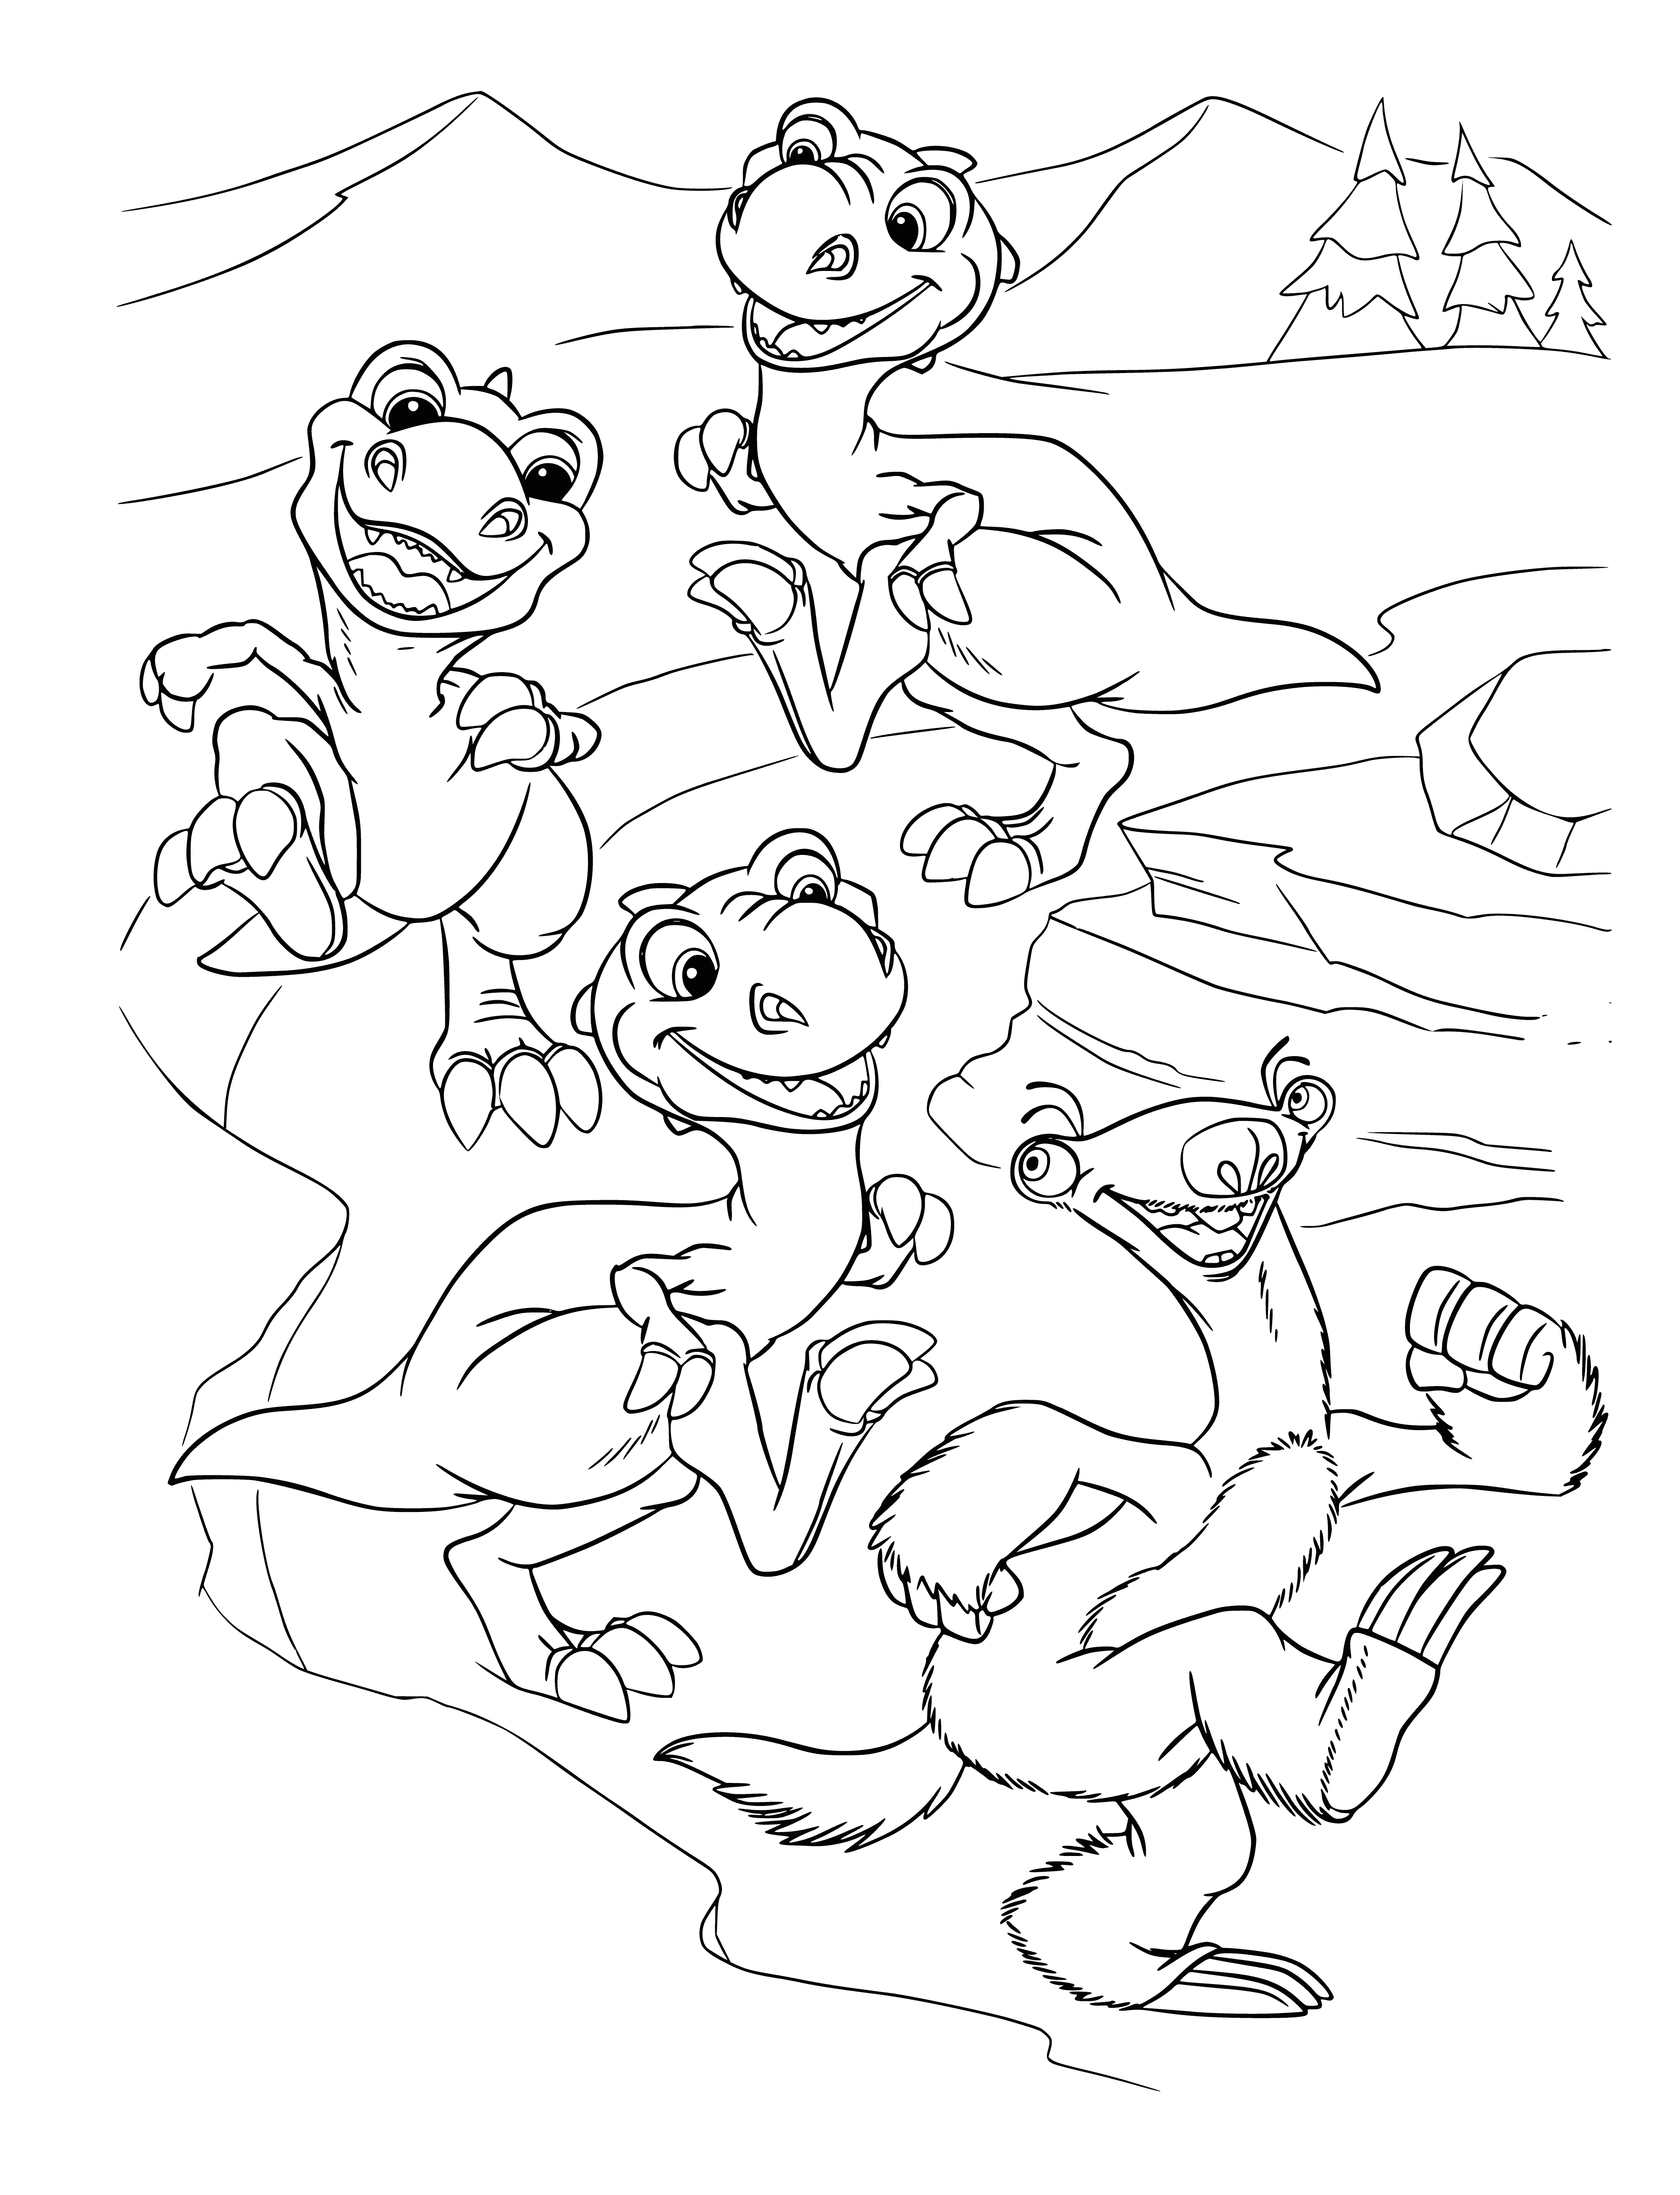 Smart dinosaurs coloring page